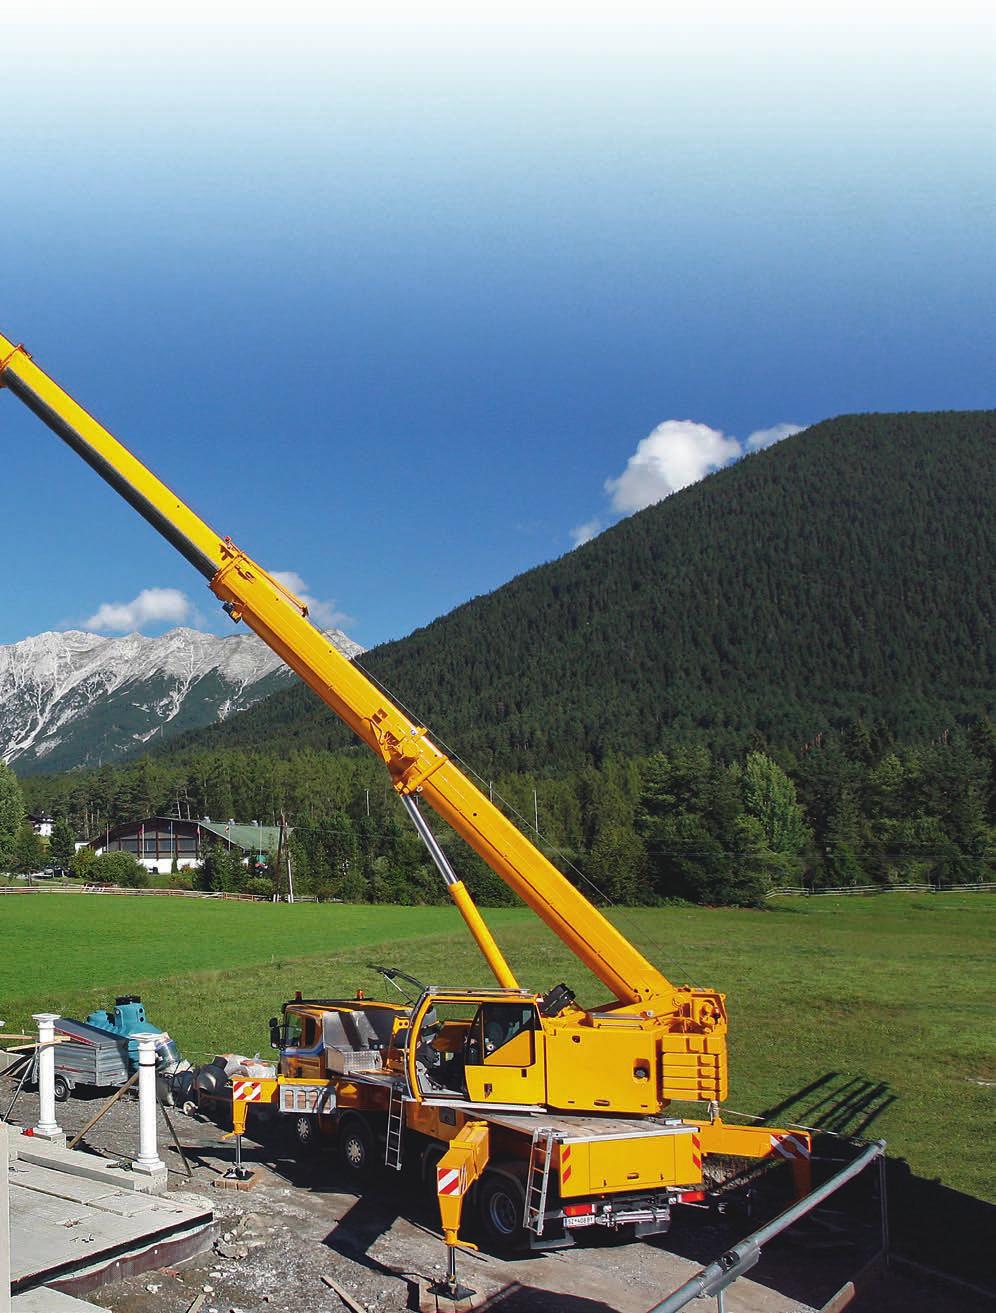 35 m long telescopic boom High capacities with full and part ballast Low axle loads, flexible registration possibilities Flexible crane control LICCON2 with mobile and multifunctional control and